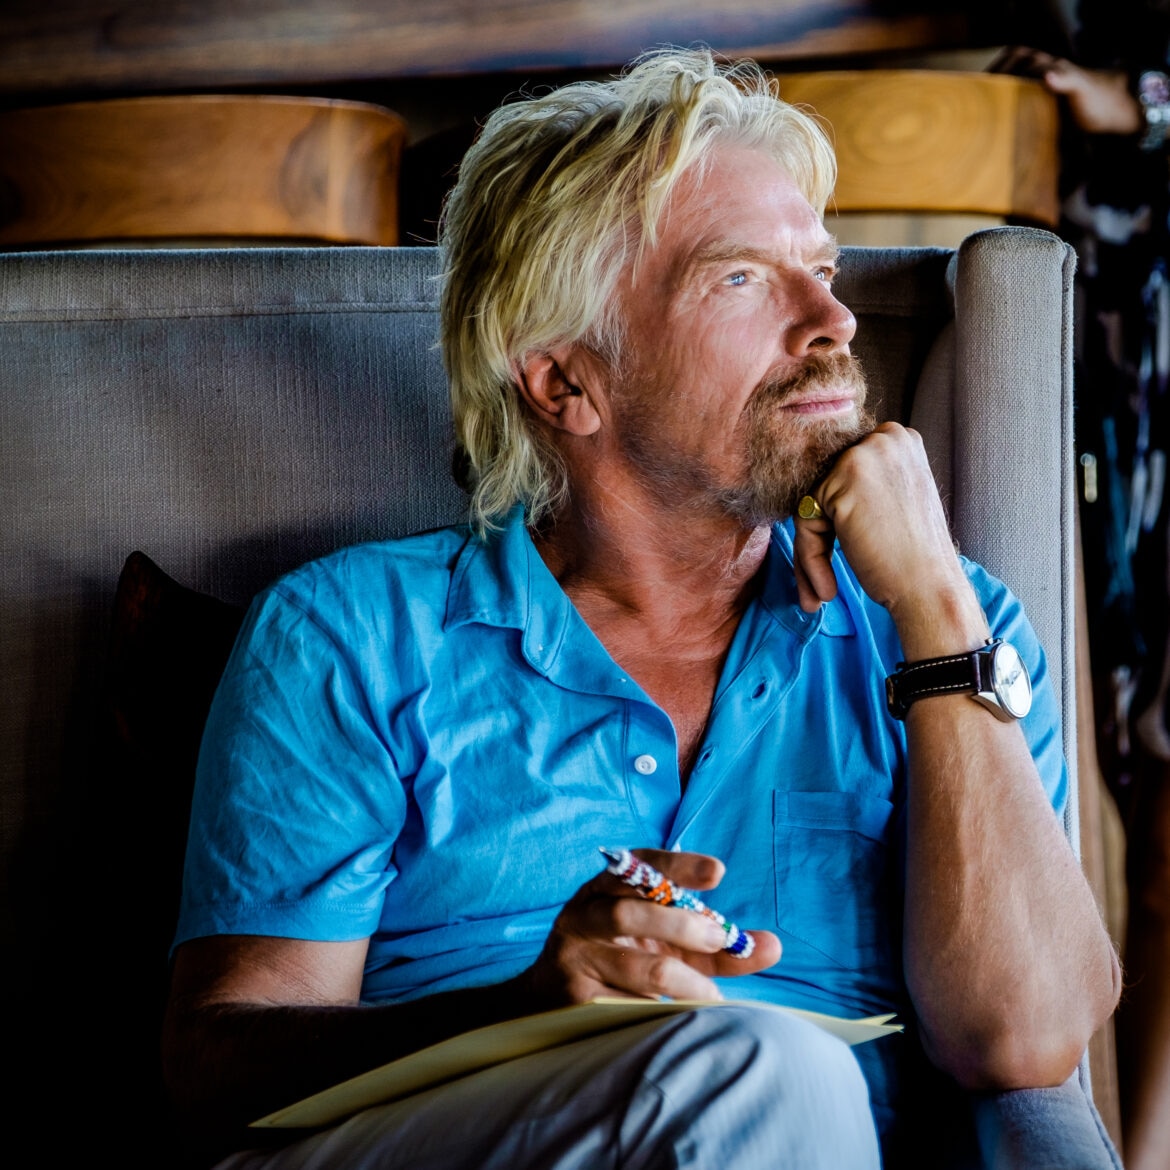 Sir Richard Branson: Hire for Personality